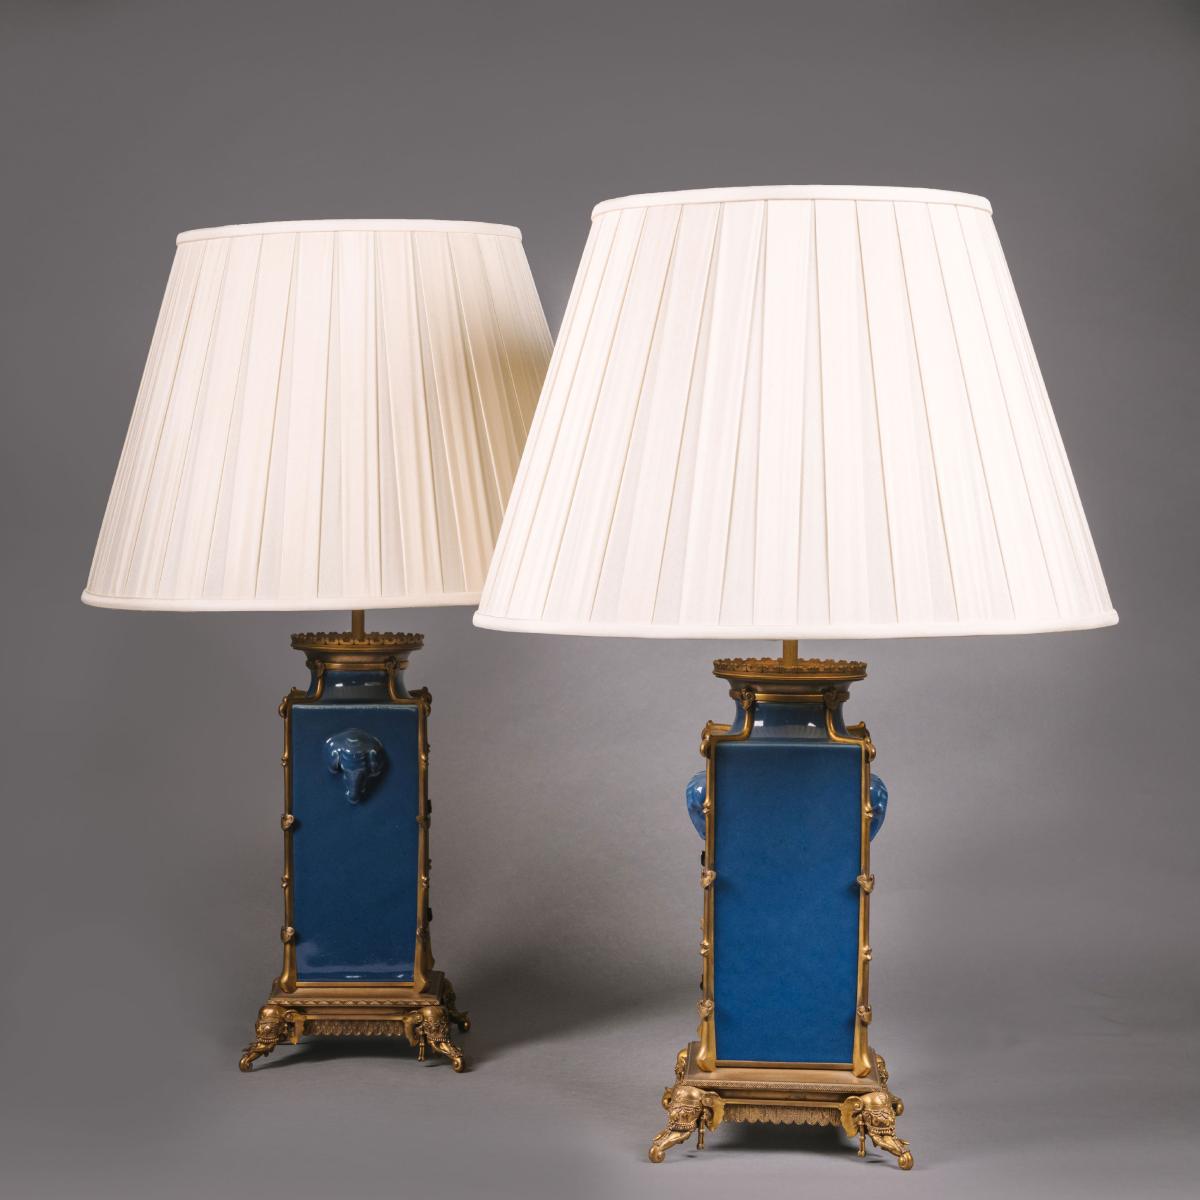 A Pair Of 'Japonisme' Gilt-Bronze-Mounted Powder-Blue Porcelain  Vases, Mounted As Lamps, by Ferdinand Barbedienne